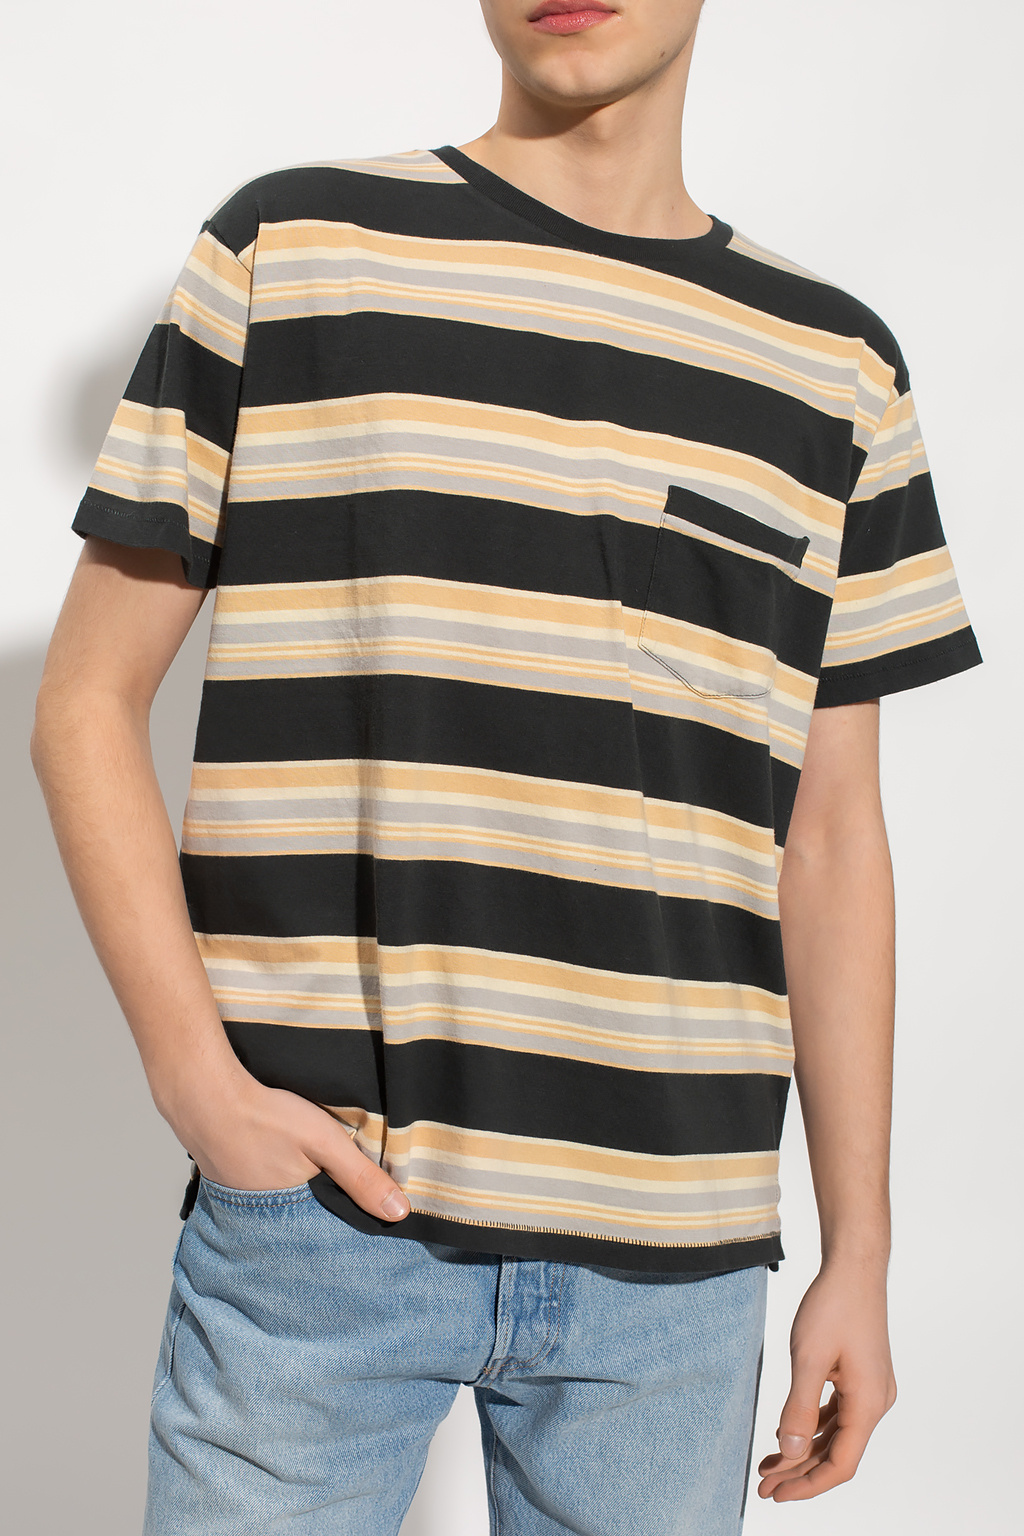 Levi's Vintage Clothing® collection T-shirt, Men's Clothing